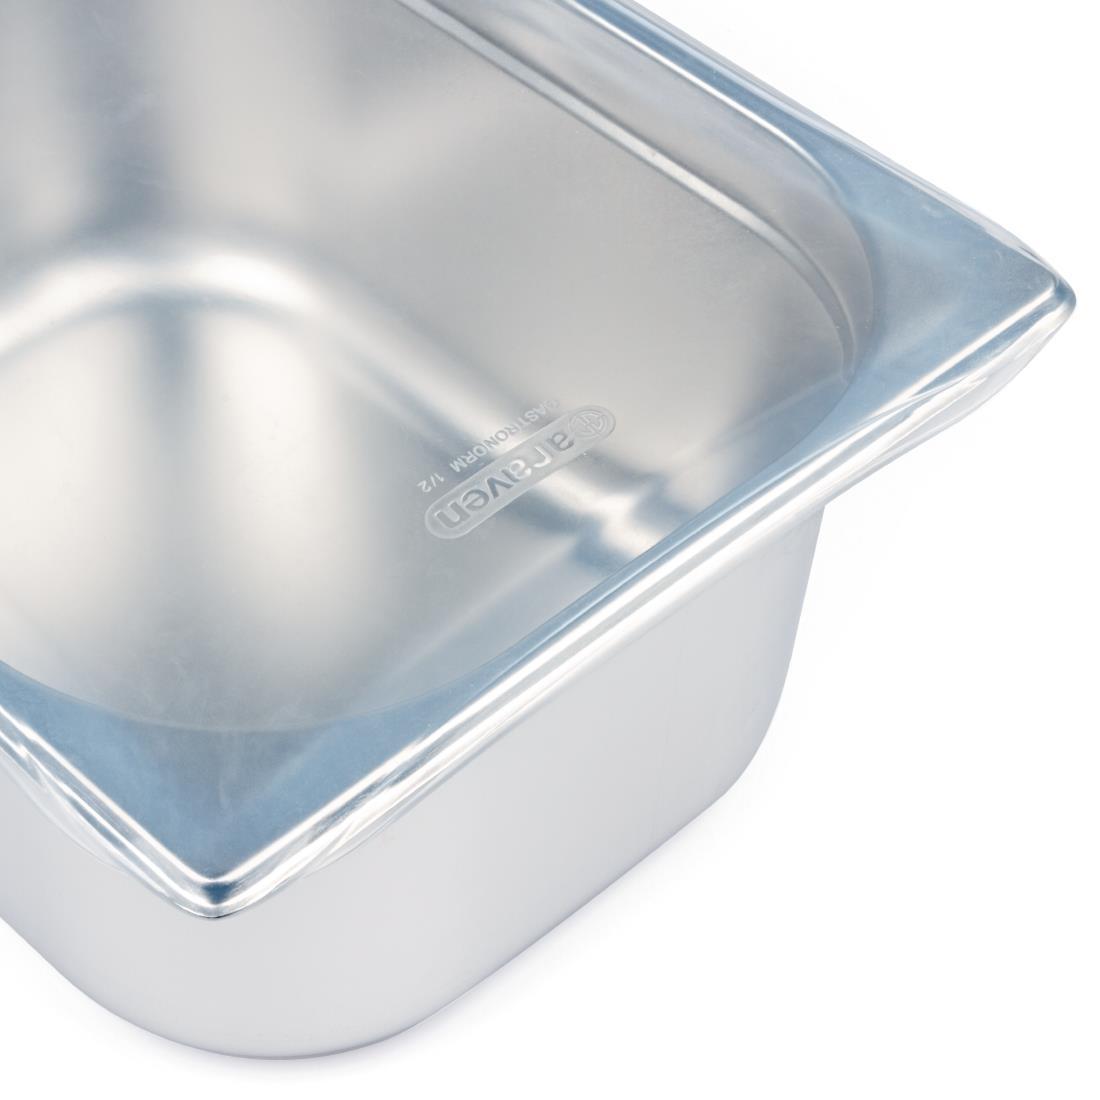 Araven Silicone 1/2 Gastronorm Lid - GG801  - 2